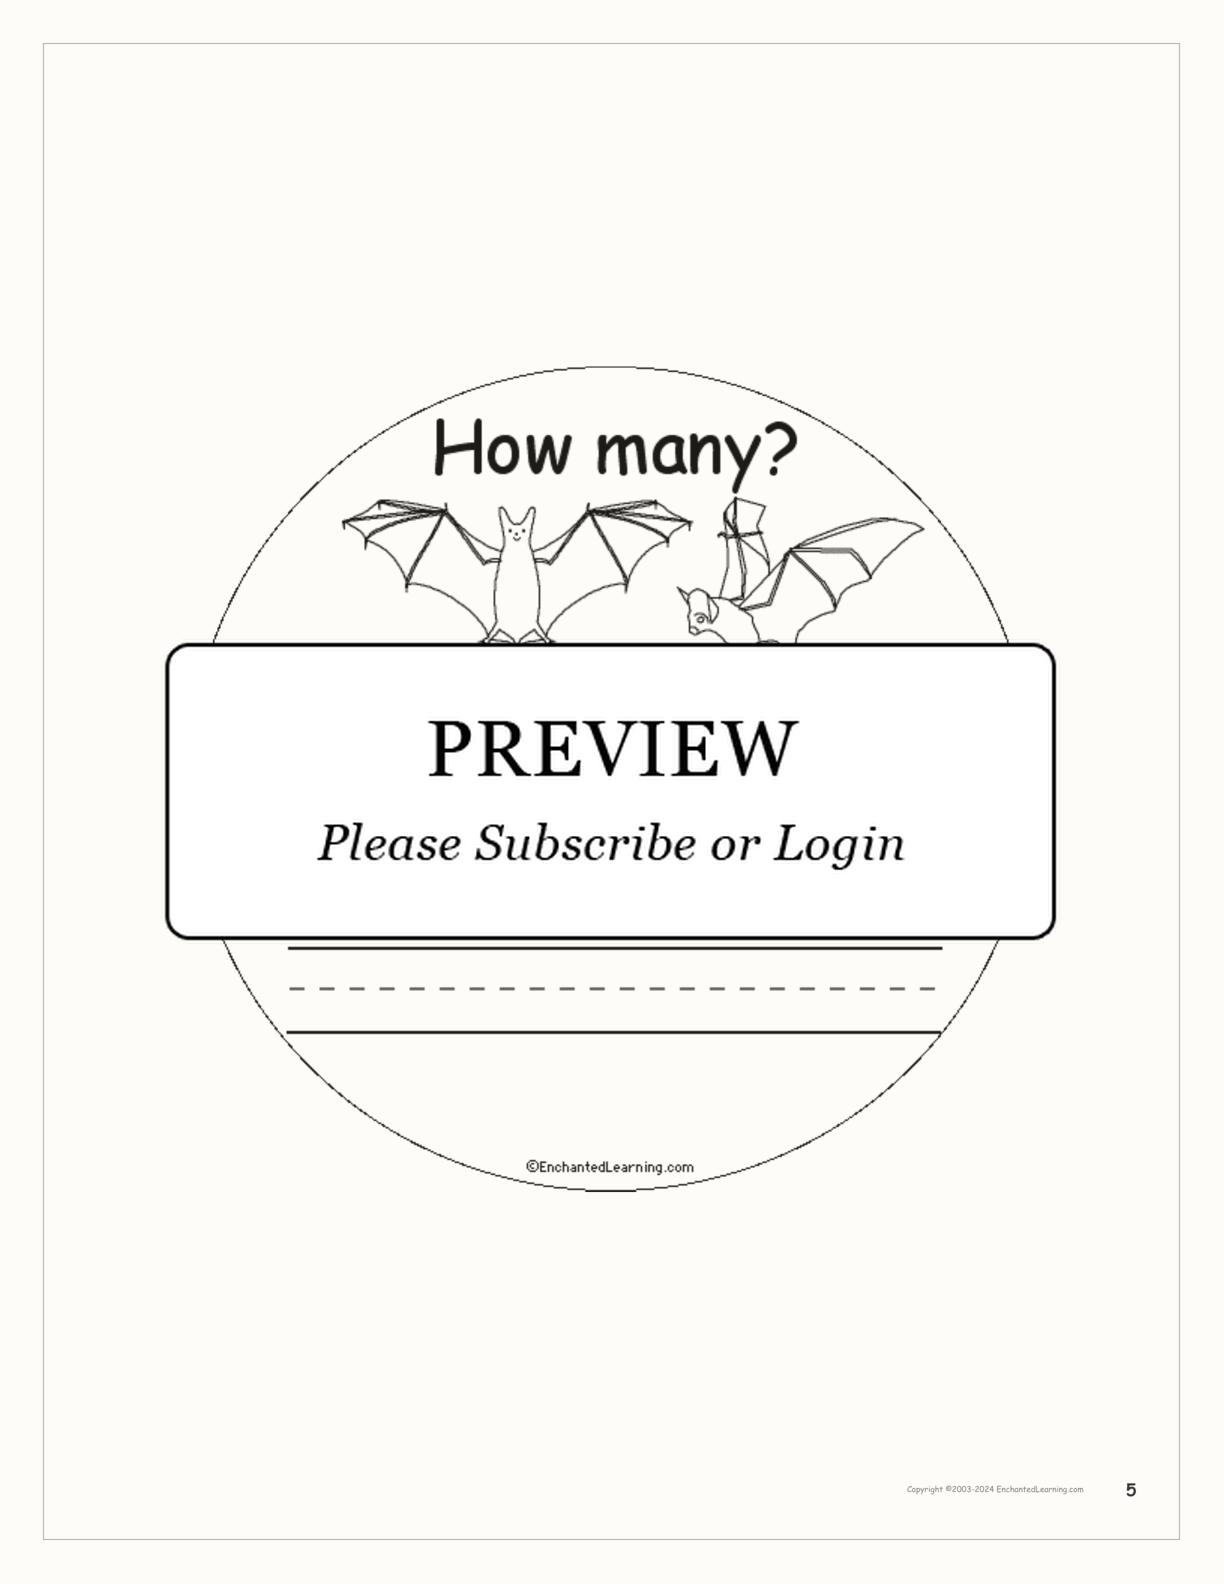 How Many Bats? Book for Early Readers interactive printout page 5